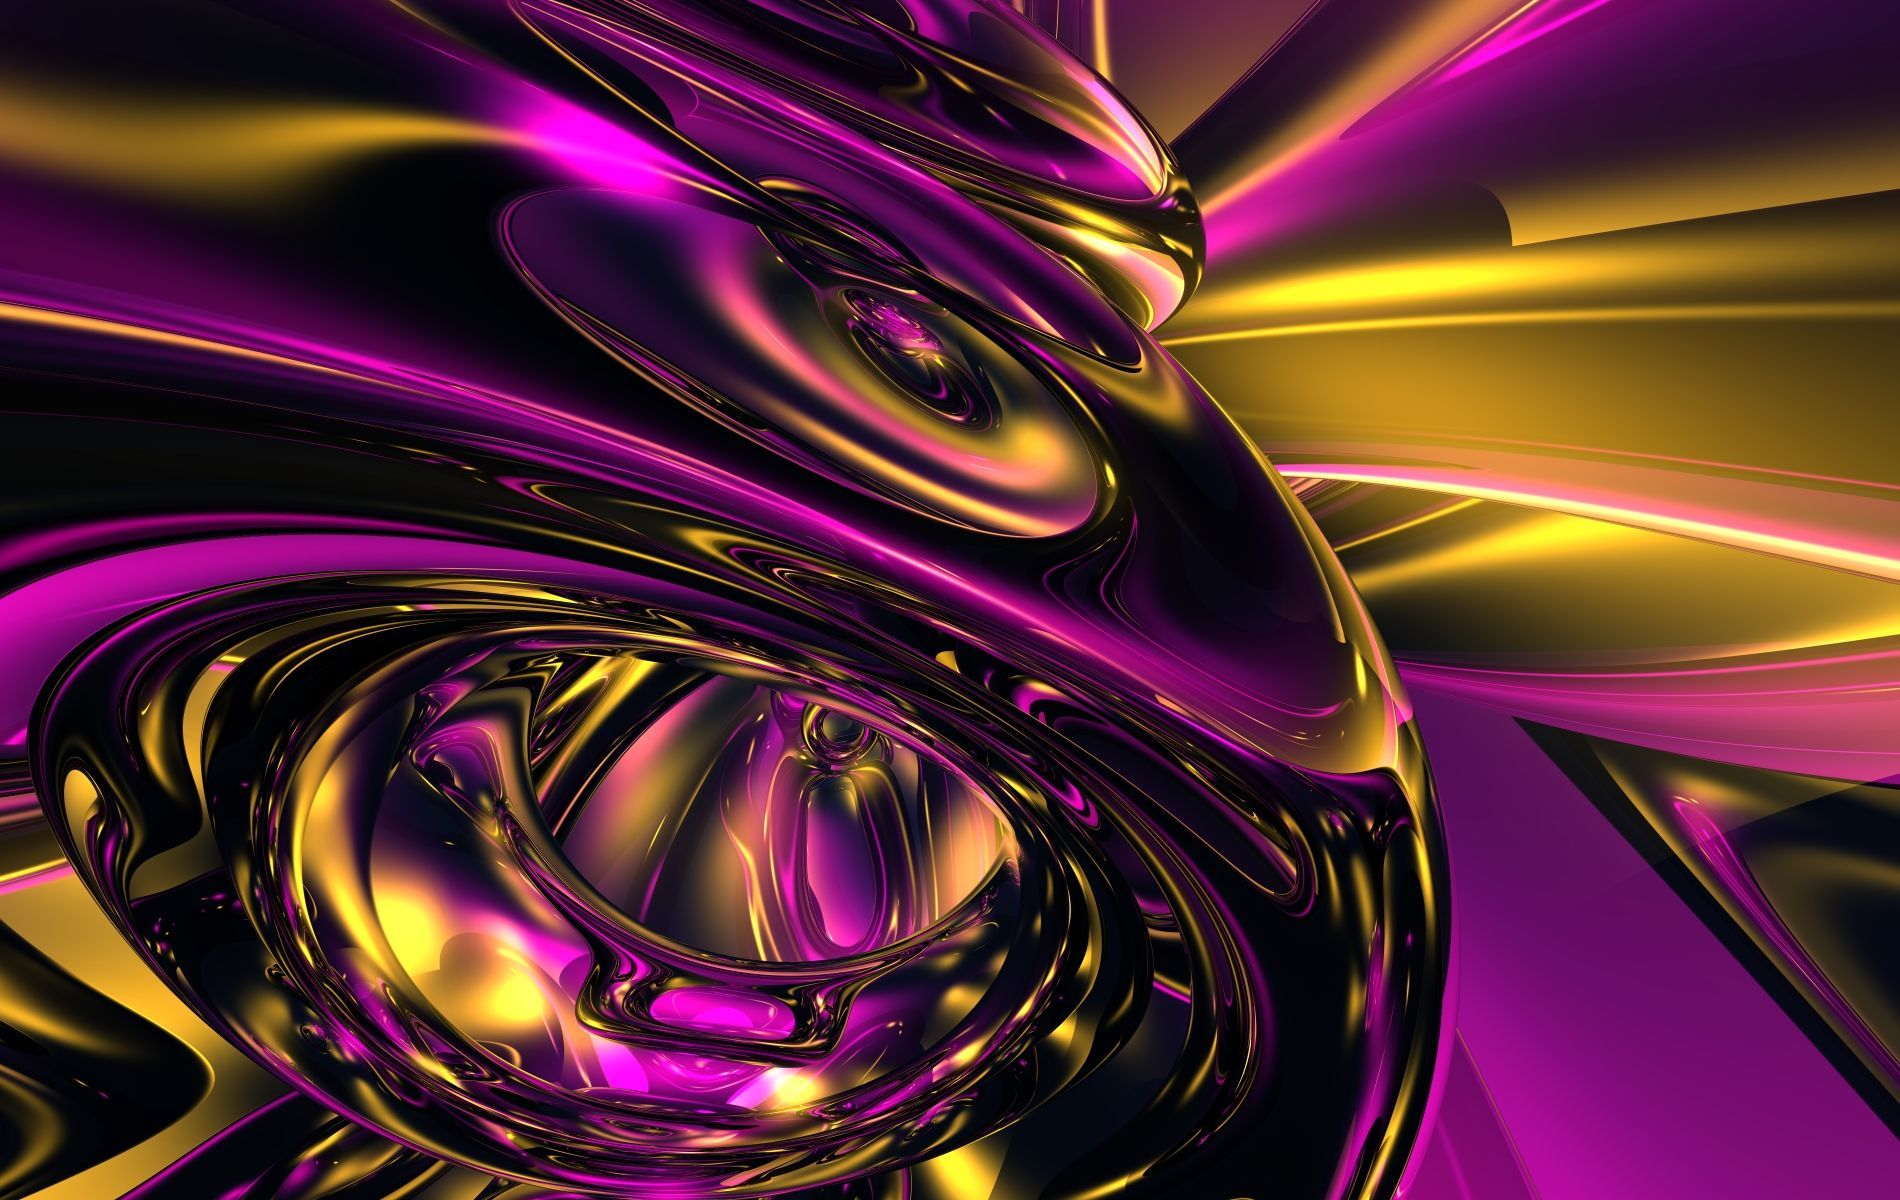 Amazing Gold And Purple Abstract Image Picture HD Wallpaper. Gold abstract wallpaper, Purple abstract, Abstract